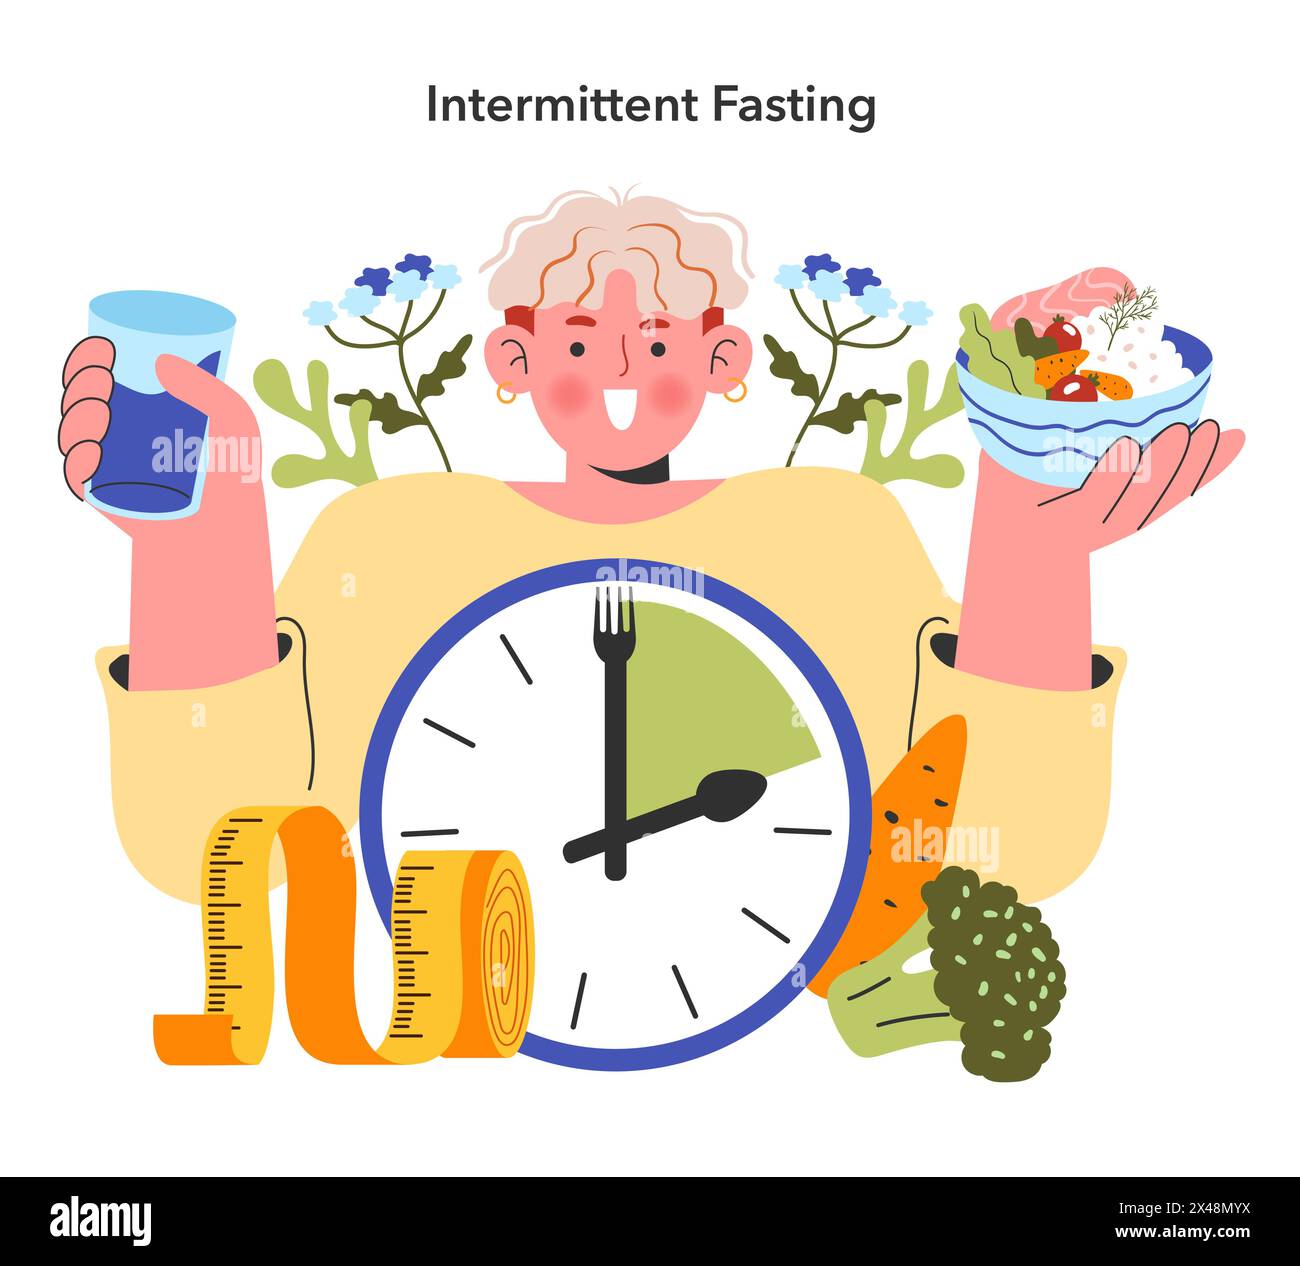 Intermittent Fasting concept. A person incorporating time-restricted eating with a focus on health and well-being. Nutrition control, weight management. Vector illustration. Stock Vector